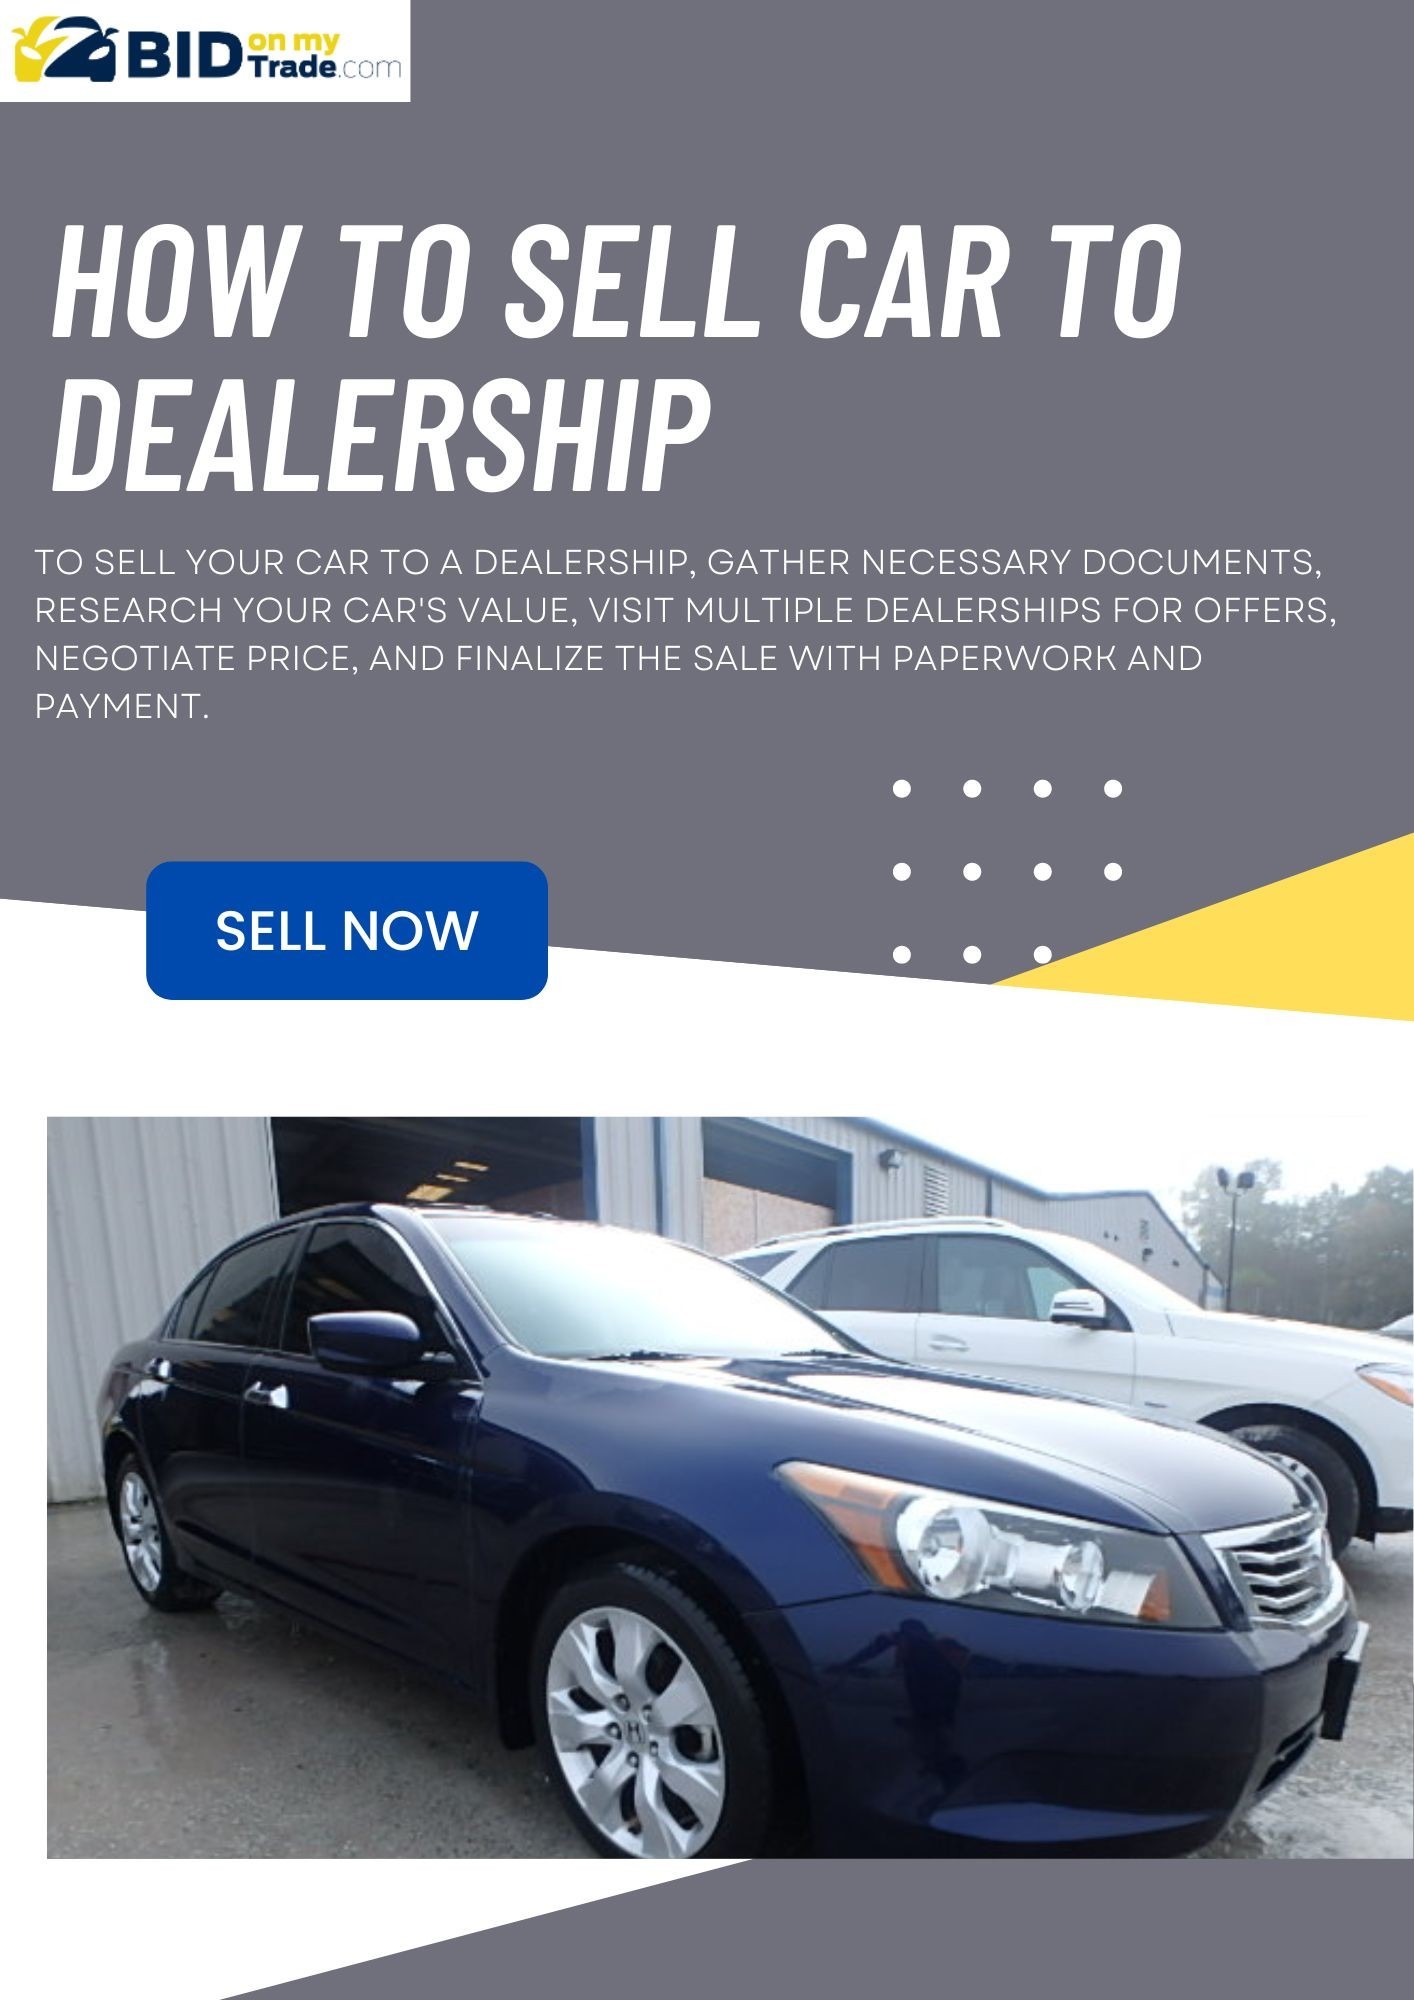 How To Sell Car To Dealership